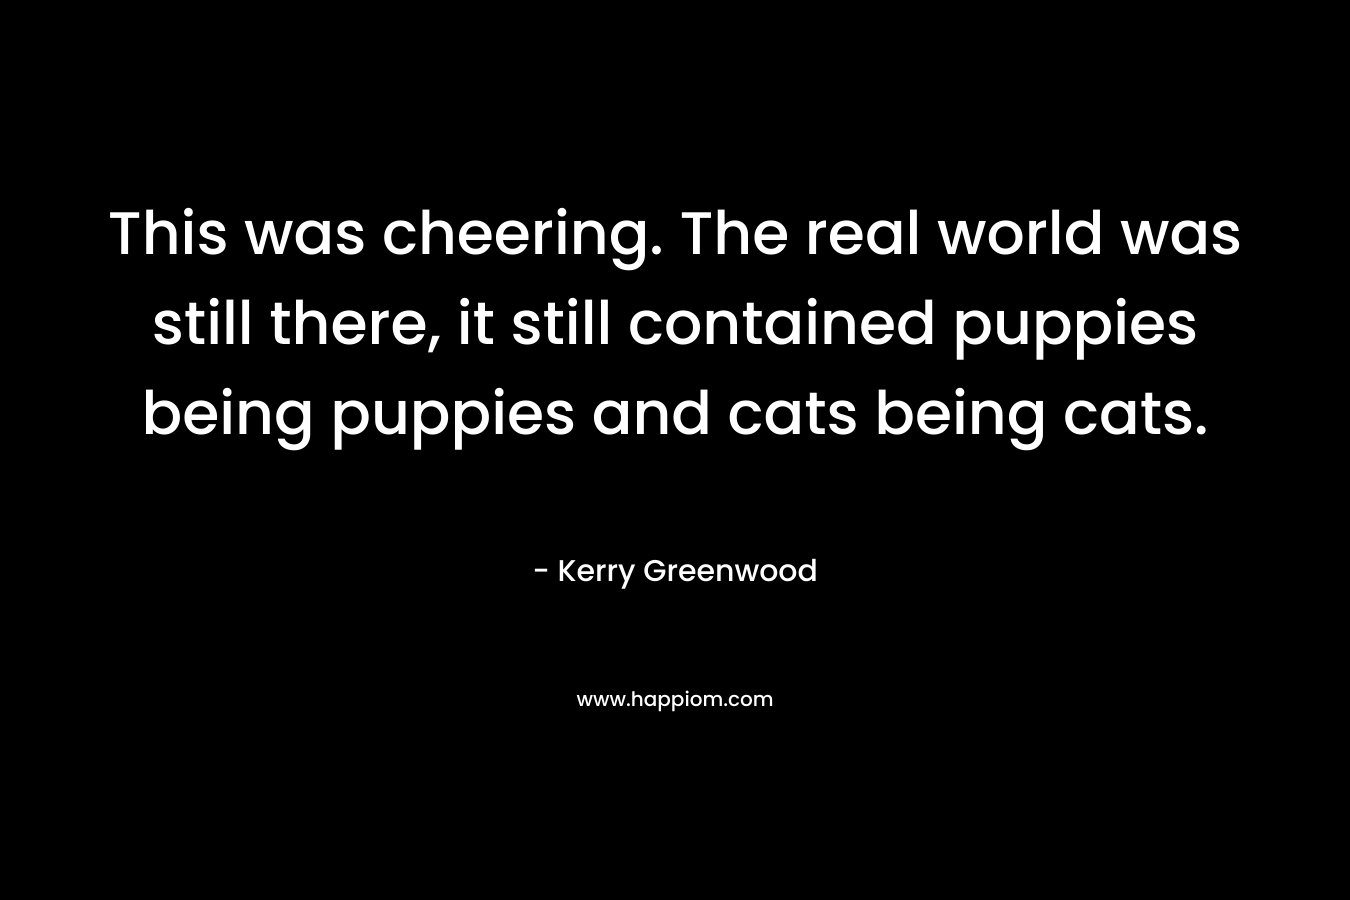 This was cheering. The real world was still there, it still contained puppies being puppies and cats being cats. – Kerry Greenwood